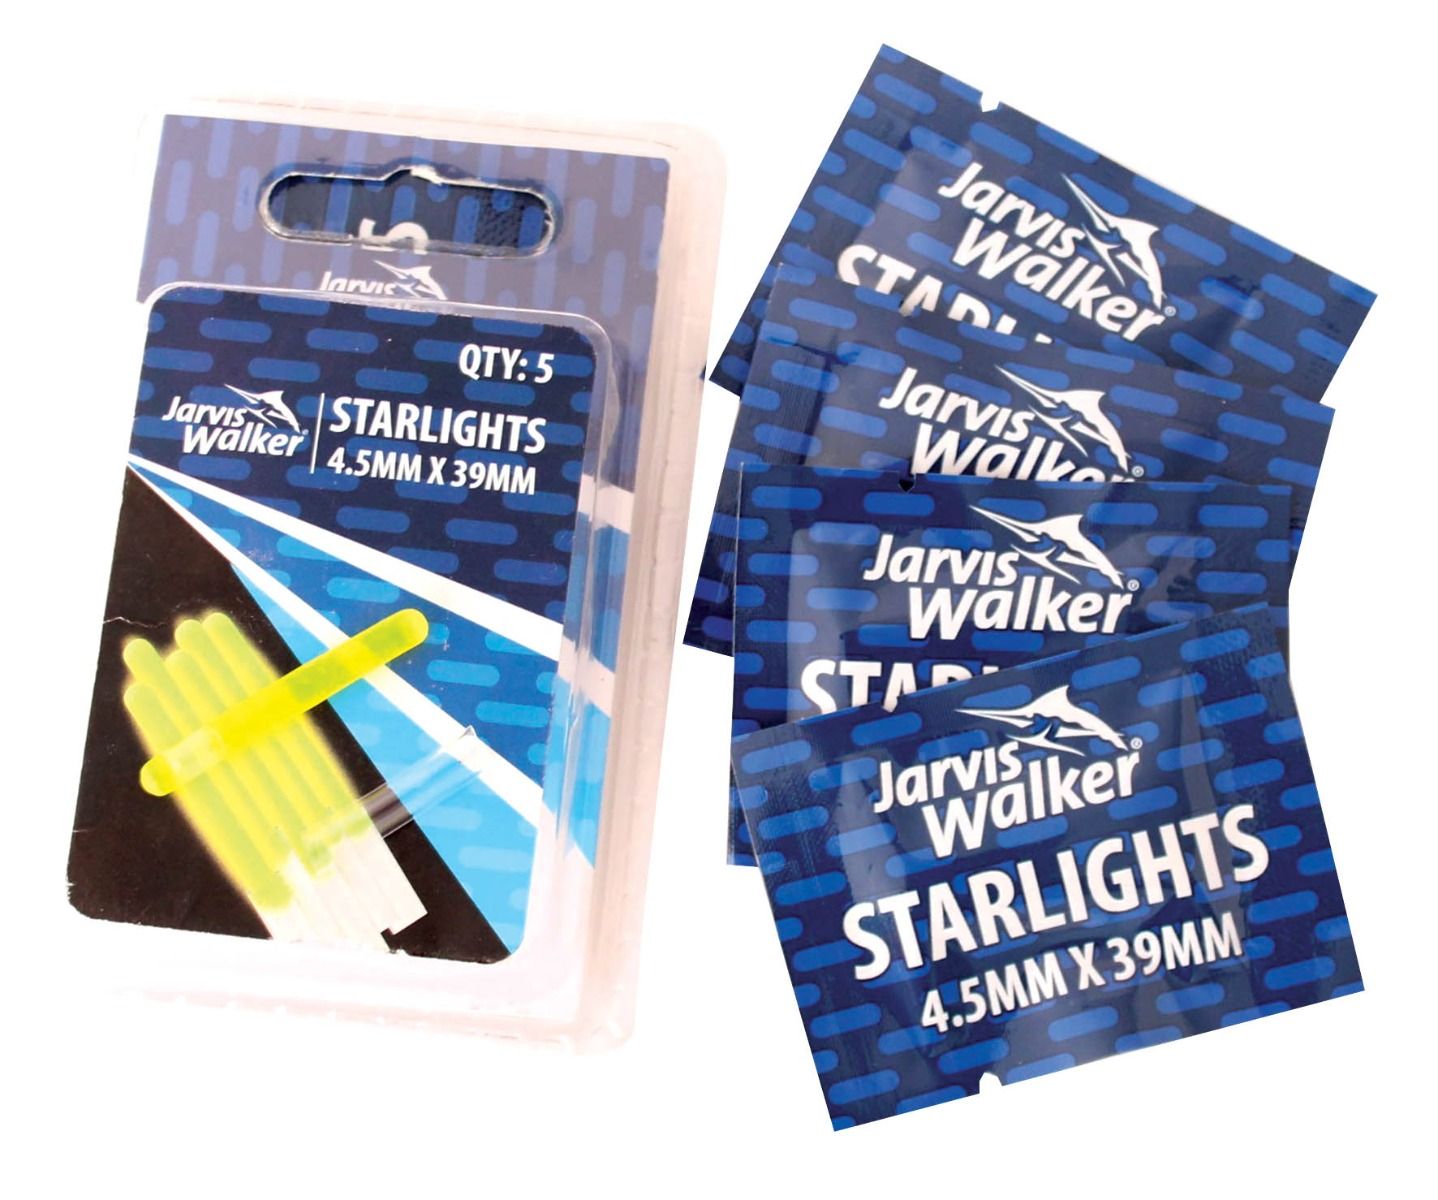 Jarvis Walker Starlights - 4.5mm X 39mm -  - Mansfield Hunting & Fishing - Products to prepare for Corona Virus